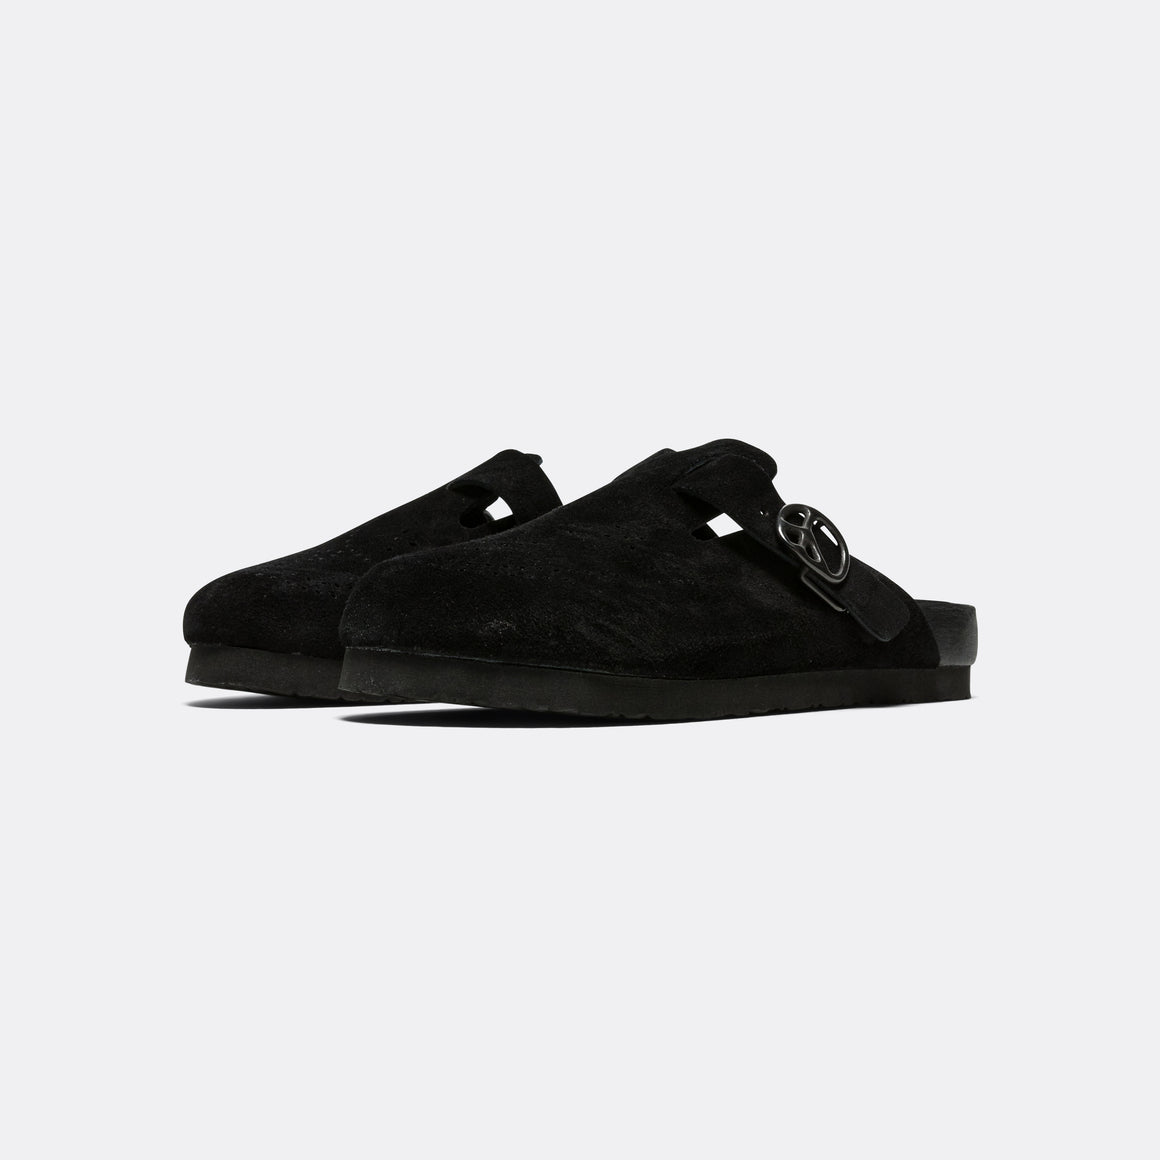 Needles - Clog Sandal - Black Suede Leather - UP THERE